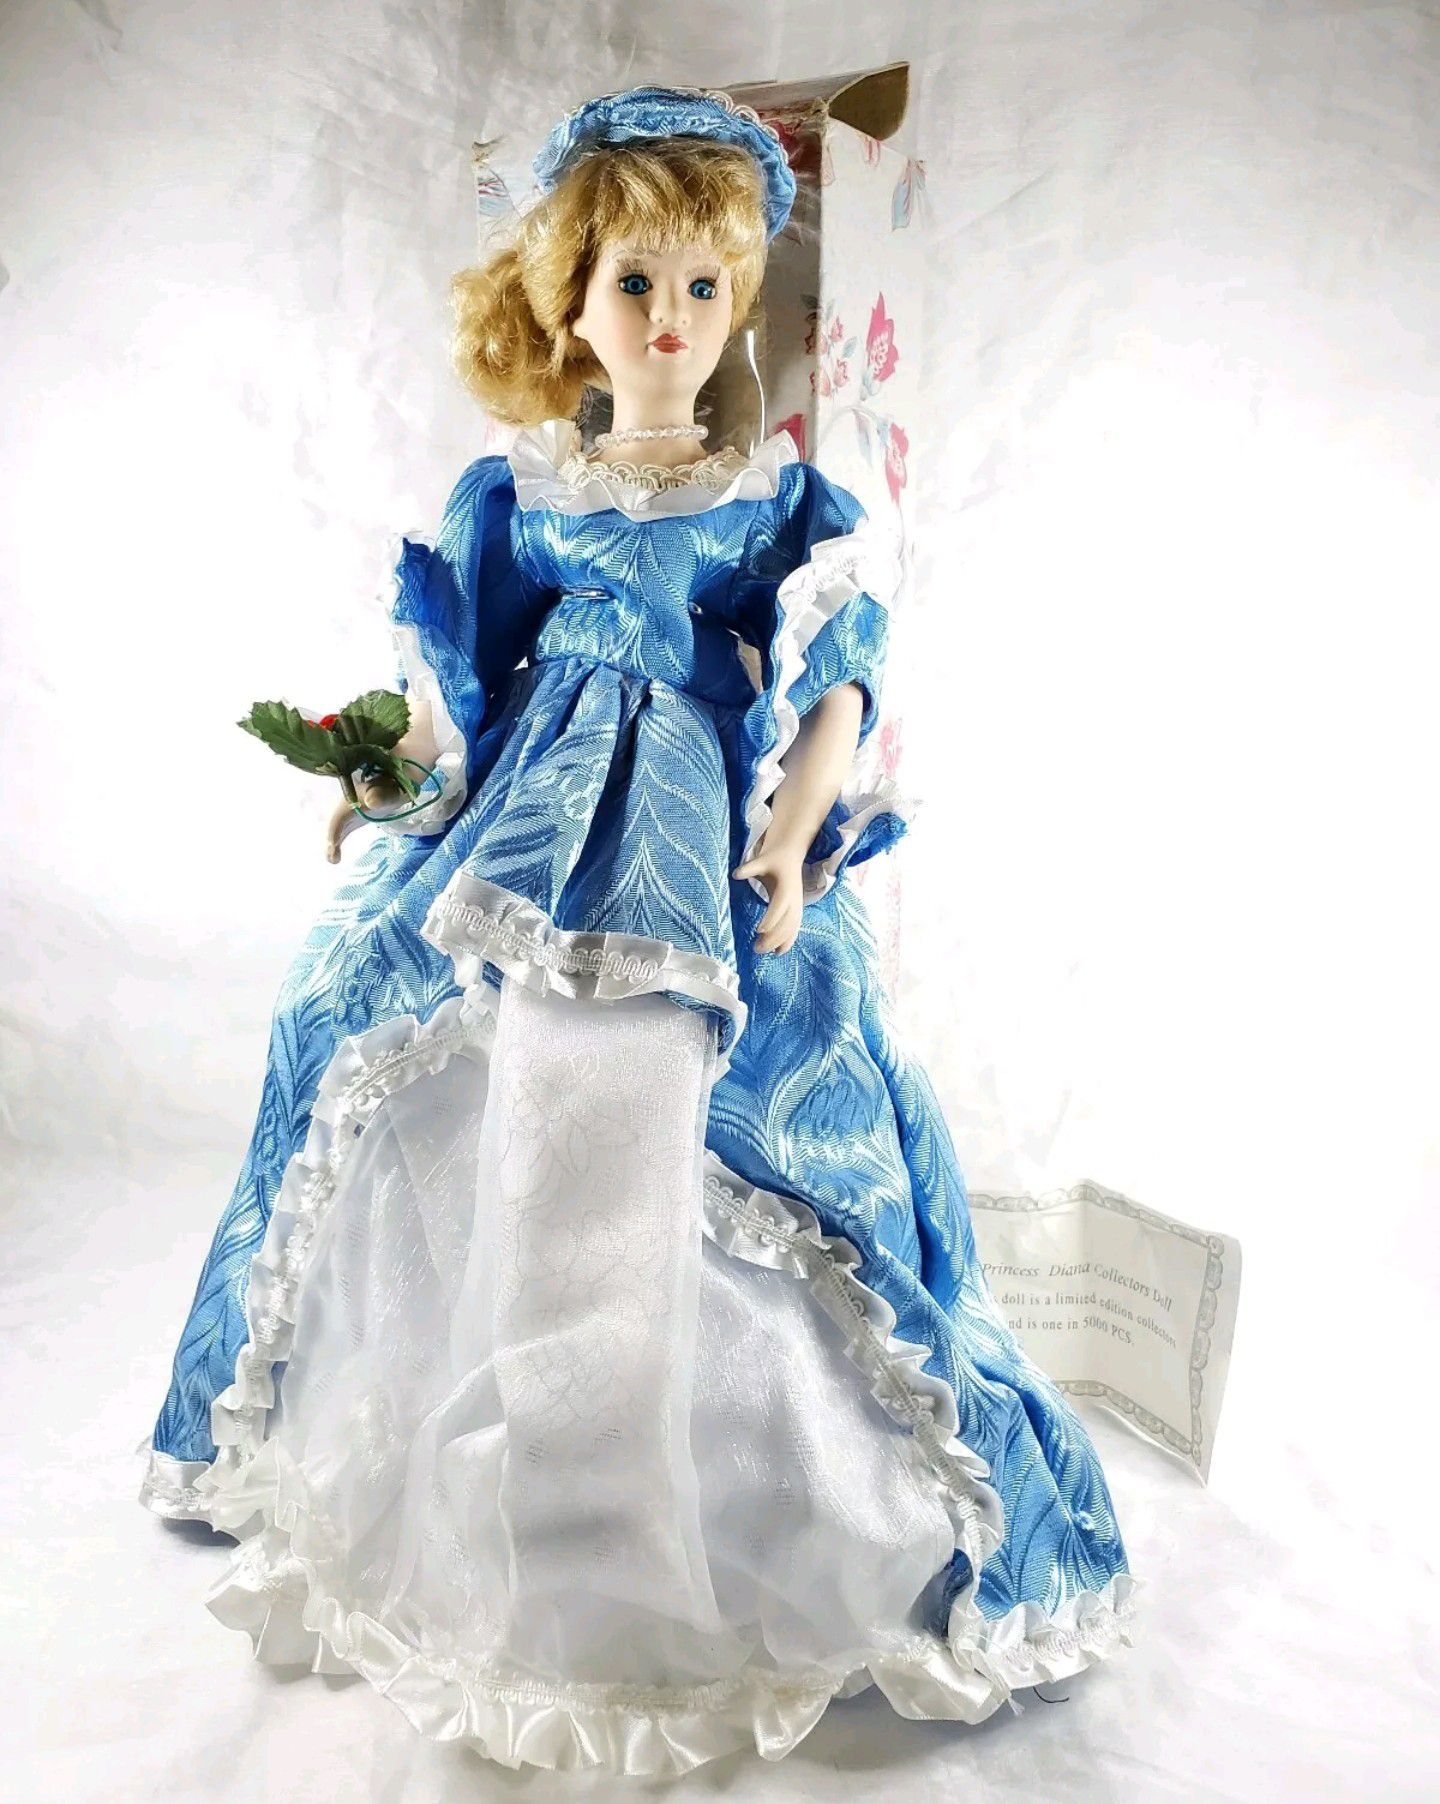 Princess Diana Porcelain Doll New in Box